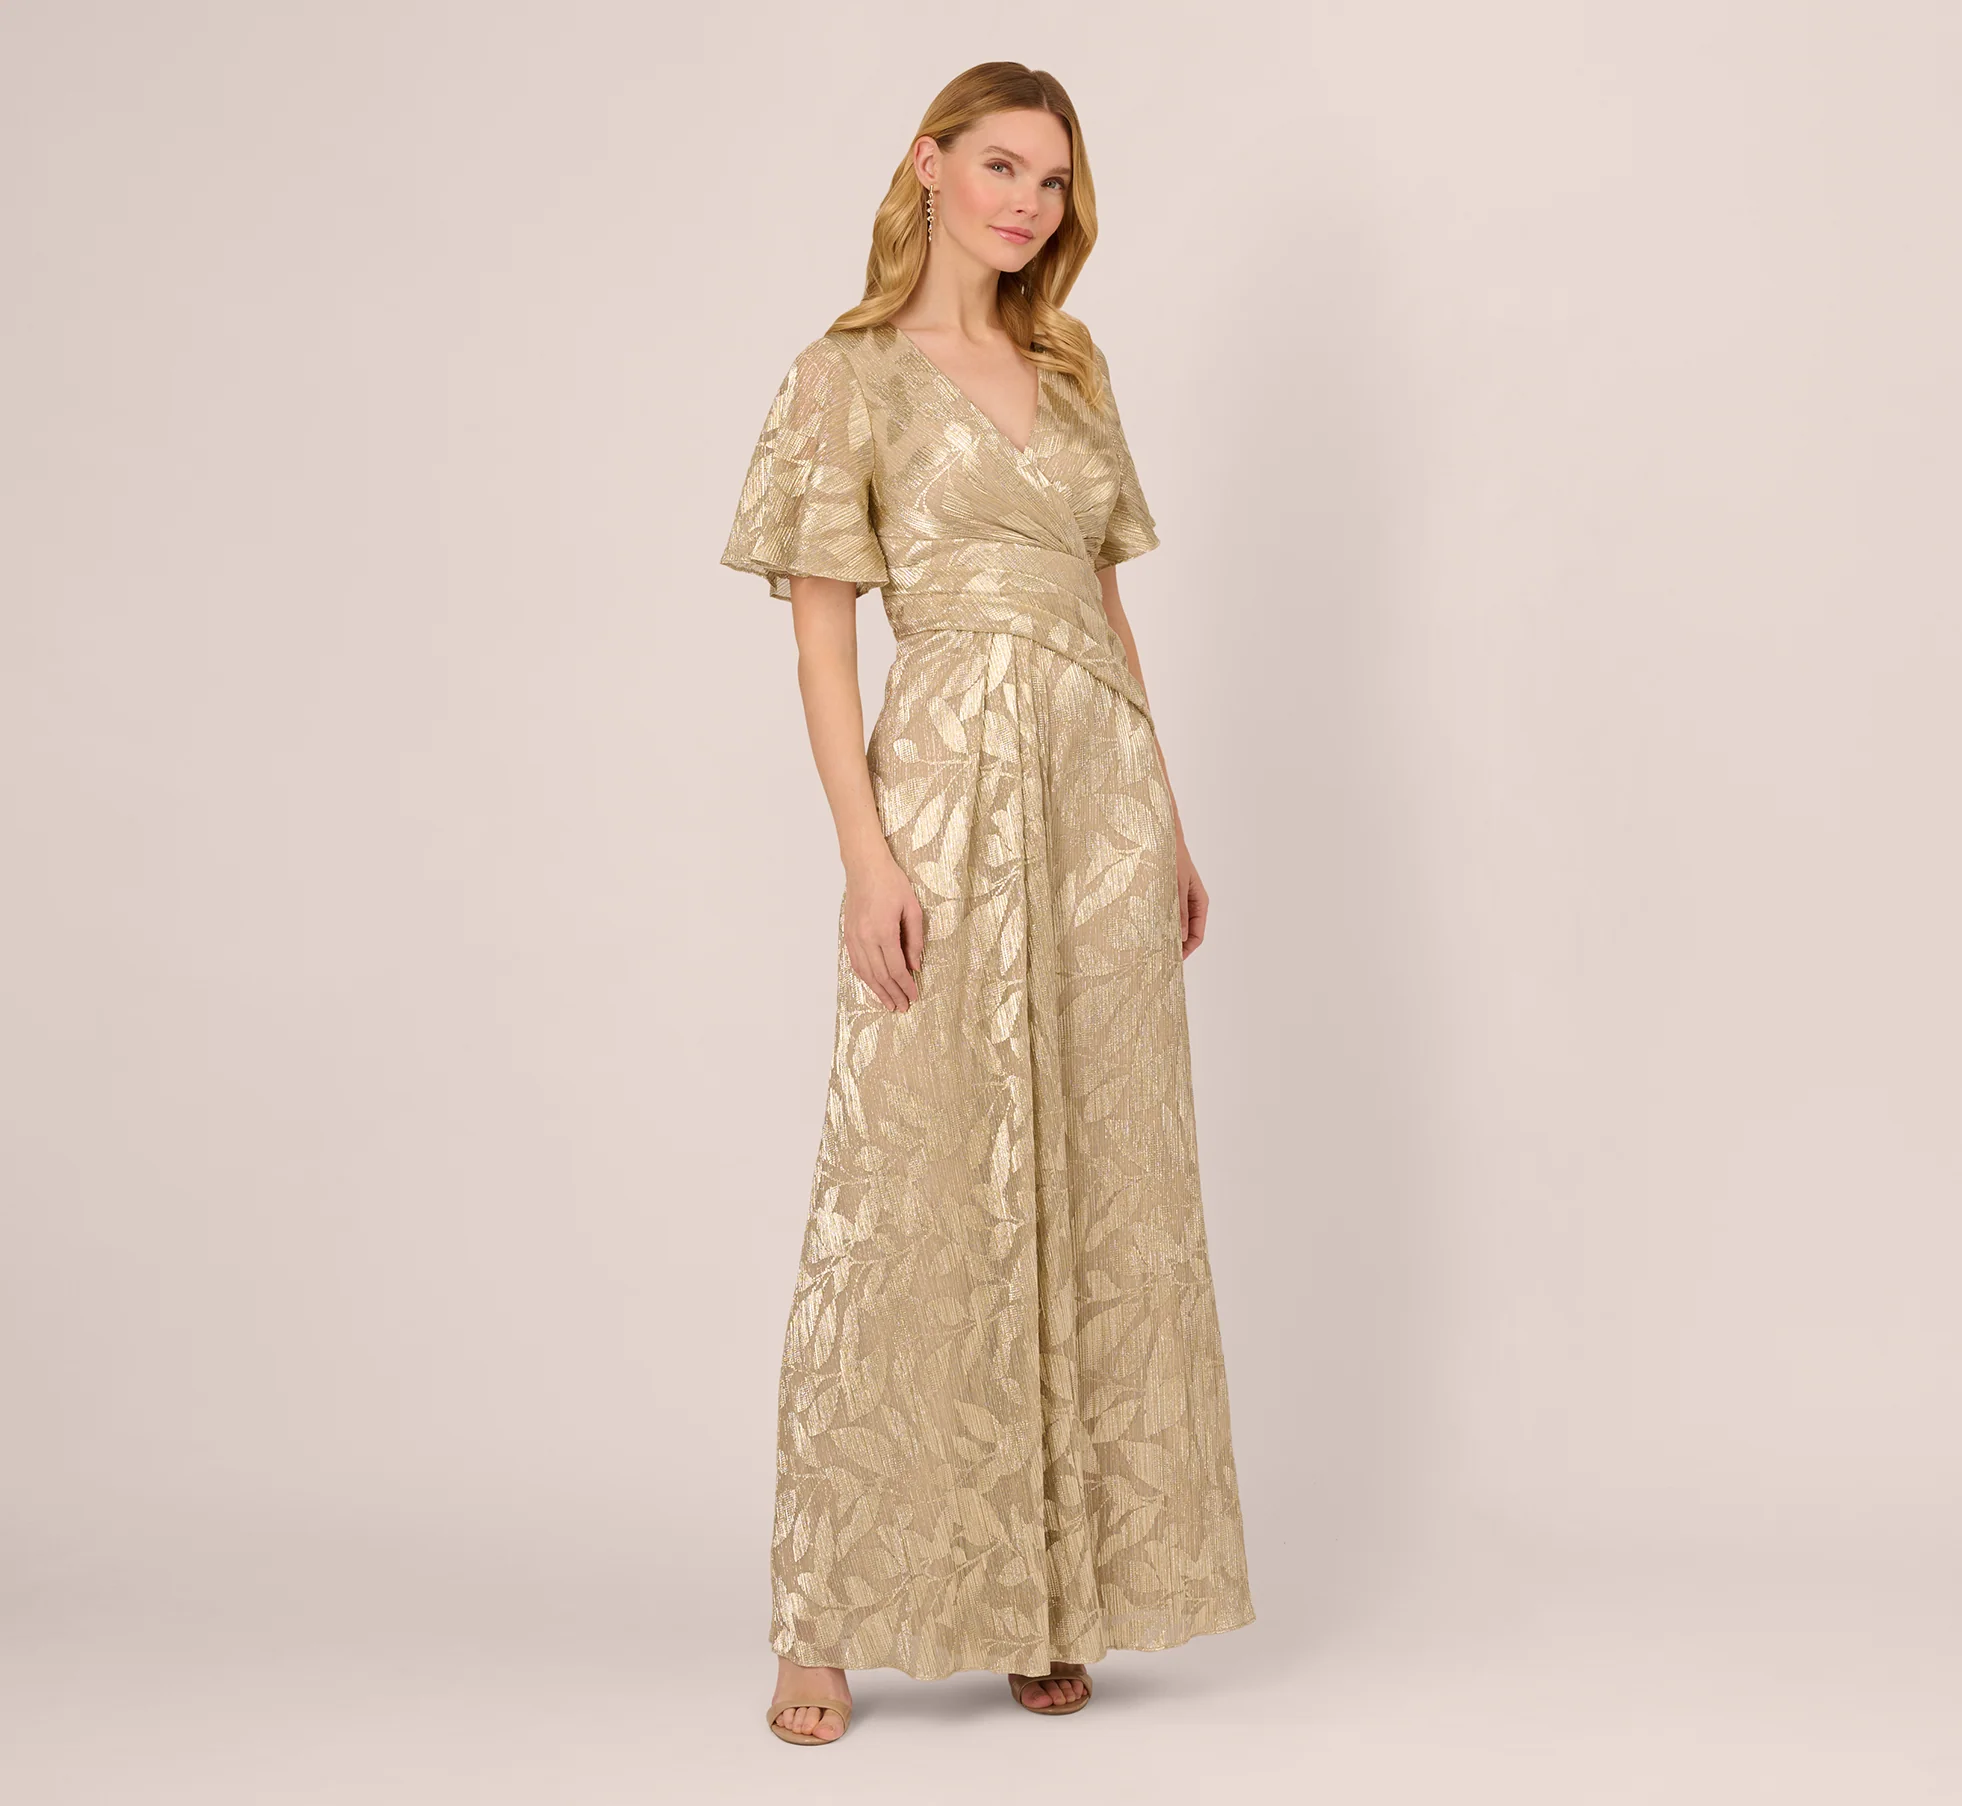 FOIL LEAF SHORT SLEEVE GOWN WITH DRAPED DETAILS IN CHAMPAGNE GOLD